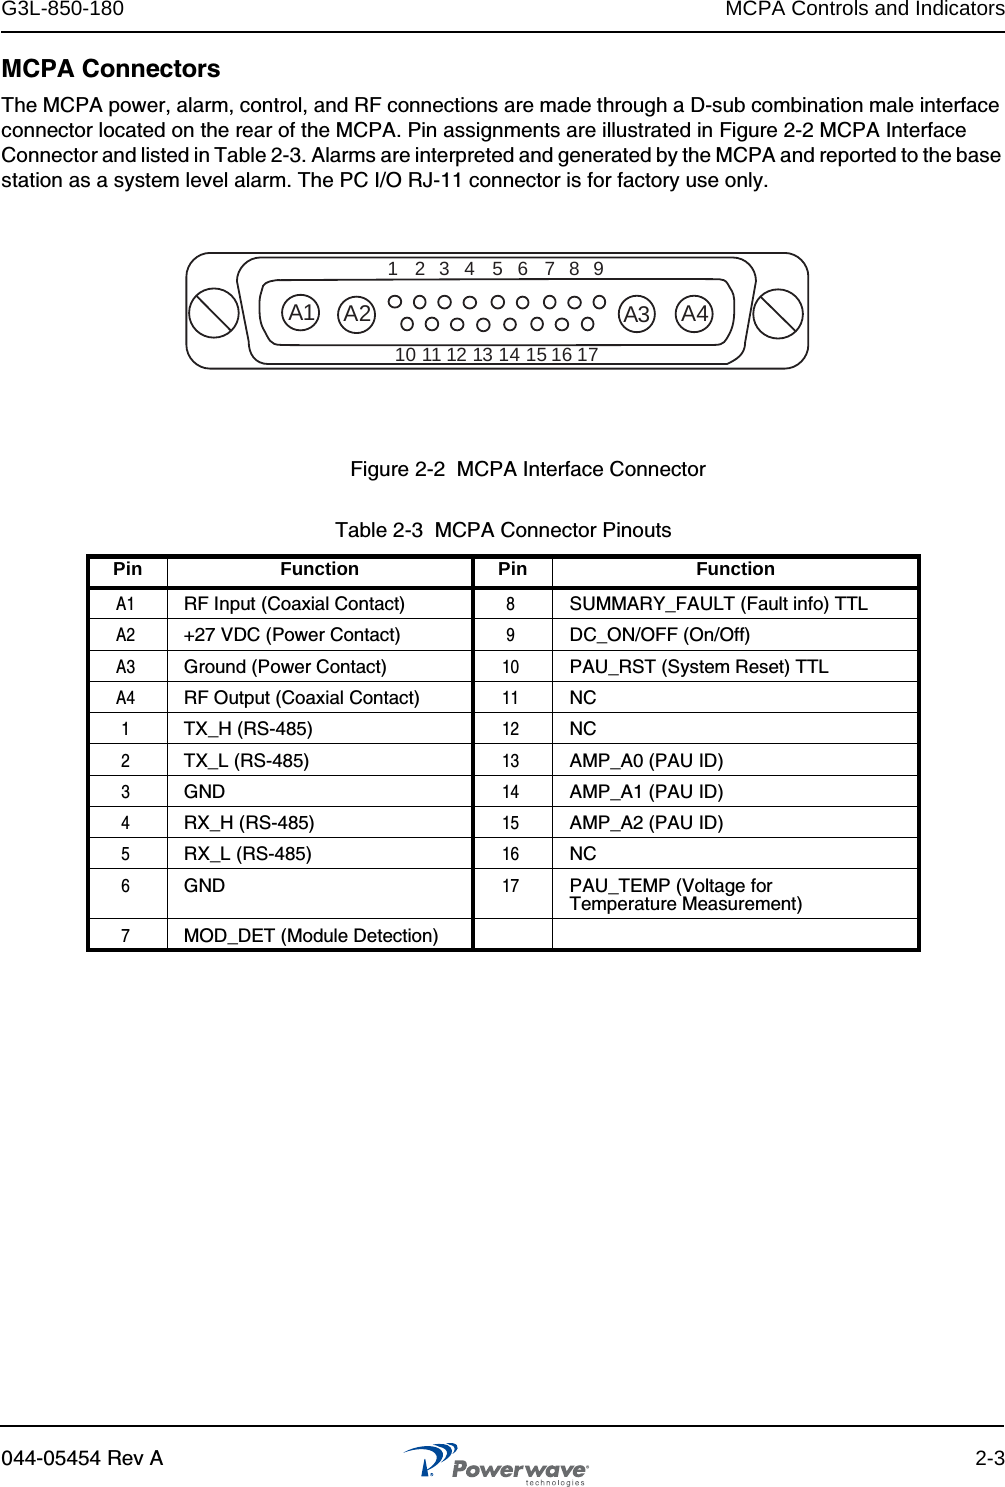 G3L-850-180 MCPA Controls and Indicators044-05454 Rev A 2-3MCPA ConnectorsThe MCPA power, alarm, control, and RF connections are made through a D-sub combination male interface connector located on the rear of the MCPA. Pin assignments are illustrated in Figure 2-2 MCPA Interface Connector and listed in Table 2-3. Alarms are interpreted and generated by the MCPA and reported to the base station as a system level alarm. The PC I/O RJ-11 connector is for factory use only.Table 2-3  MCPA Connector PinoutsPin Function Pin FunctionA1 RF Input (Coaxial Contact) 8SUMMARY_FAULT (Fault info) TTLA2 +27 VDC (Power Contact) 9DC_ON/OFF (On/Off)A3 Ground (Power Contact) 10 PAU_RST (System Reset) TTLA4 RF Output (Coaxial Contact) 11 NC1TX_H (RS-485) 12 NC2TX_L (RS-485) 13 AMP_A0 (PAU ID)3GND 14 AMP_A1 (PAU ID)4RX_H (RS-485) 15 AMP_A2 (PAU ID)5RX_L (RS-485) 16 NC6GND 17 PAU_TEMP (Voltage forTemperature Measurement)7MOD_DET (Module Detection)123A1 A2 A3 A445678910 11 12 13 14 15 16 17Figure 2-2  MCPA Interface Connector